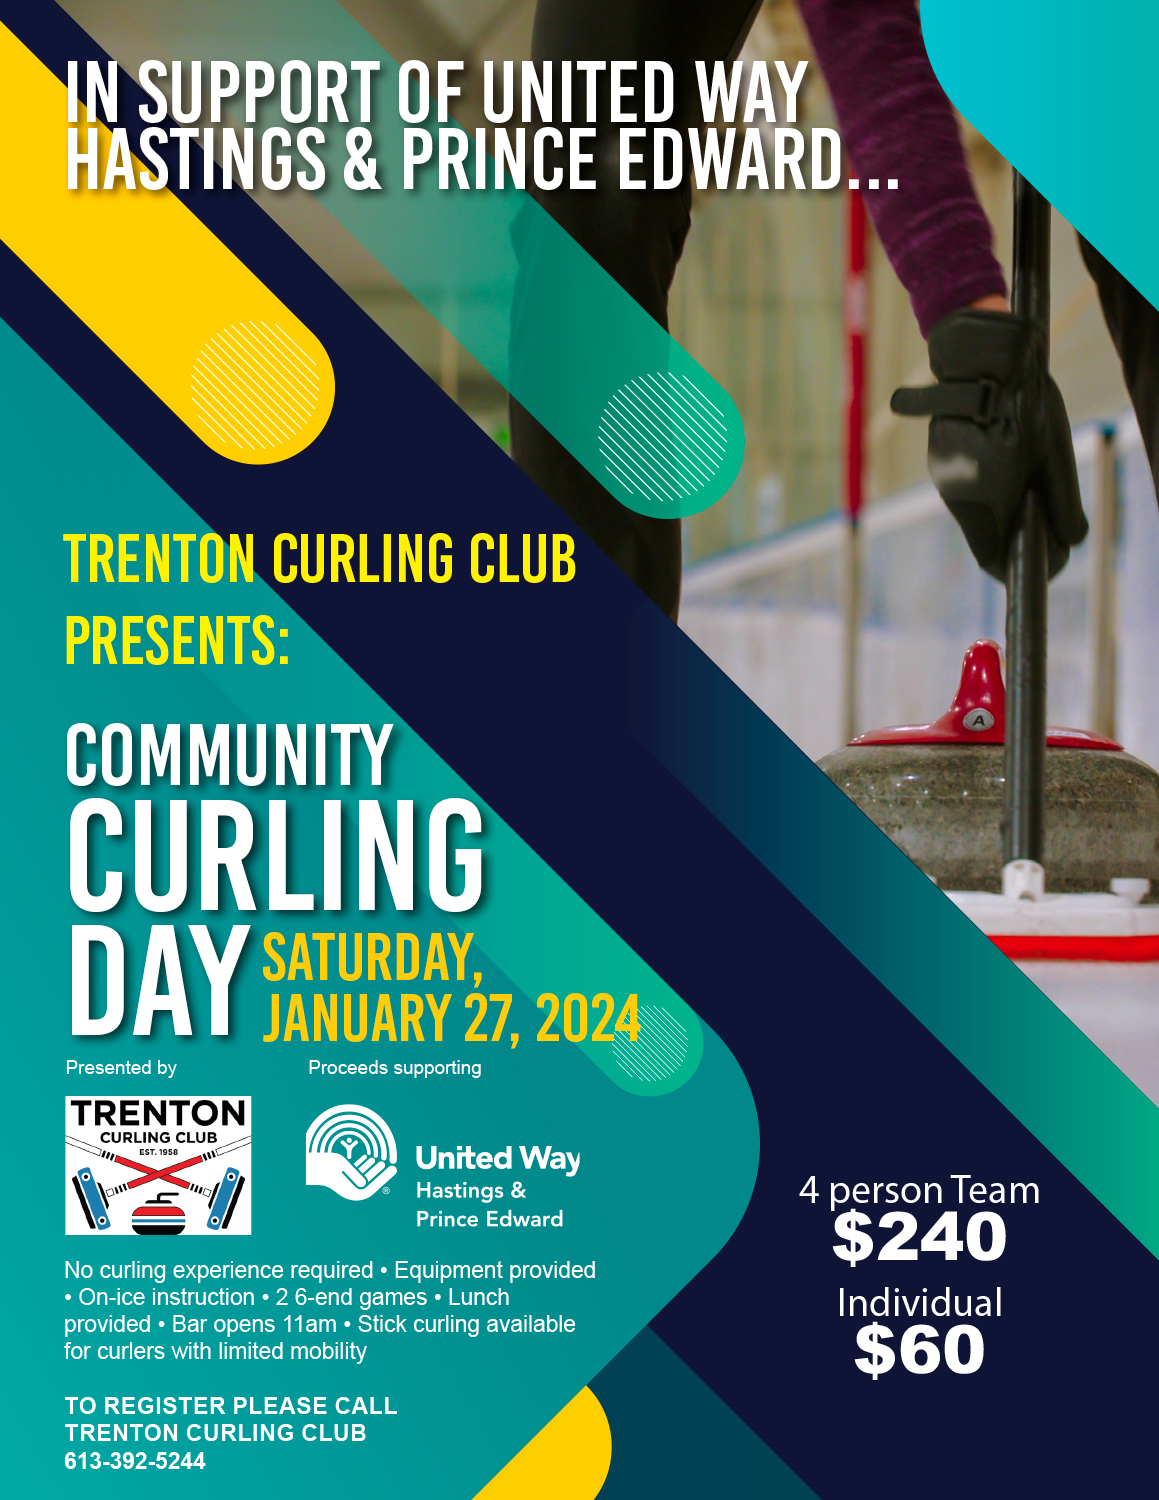 Event poster with curling scene and details highlighted on our posting. Also feautres curling club logo and United Way logo